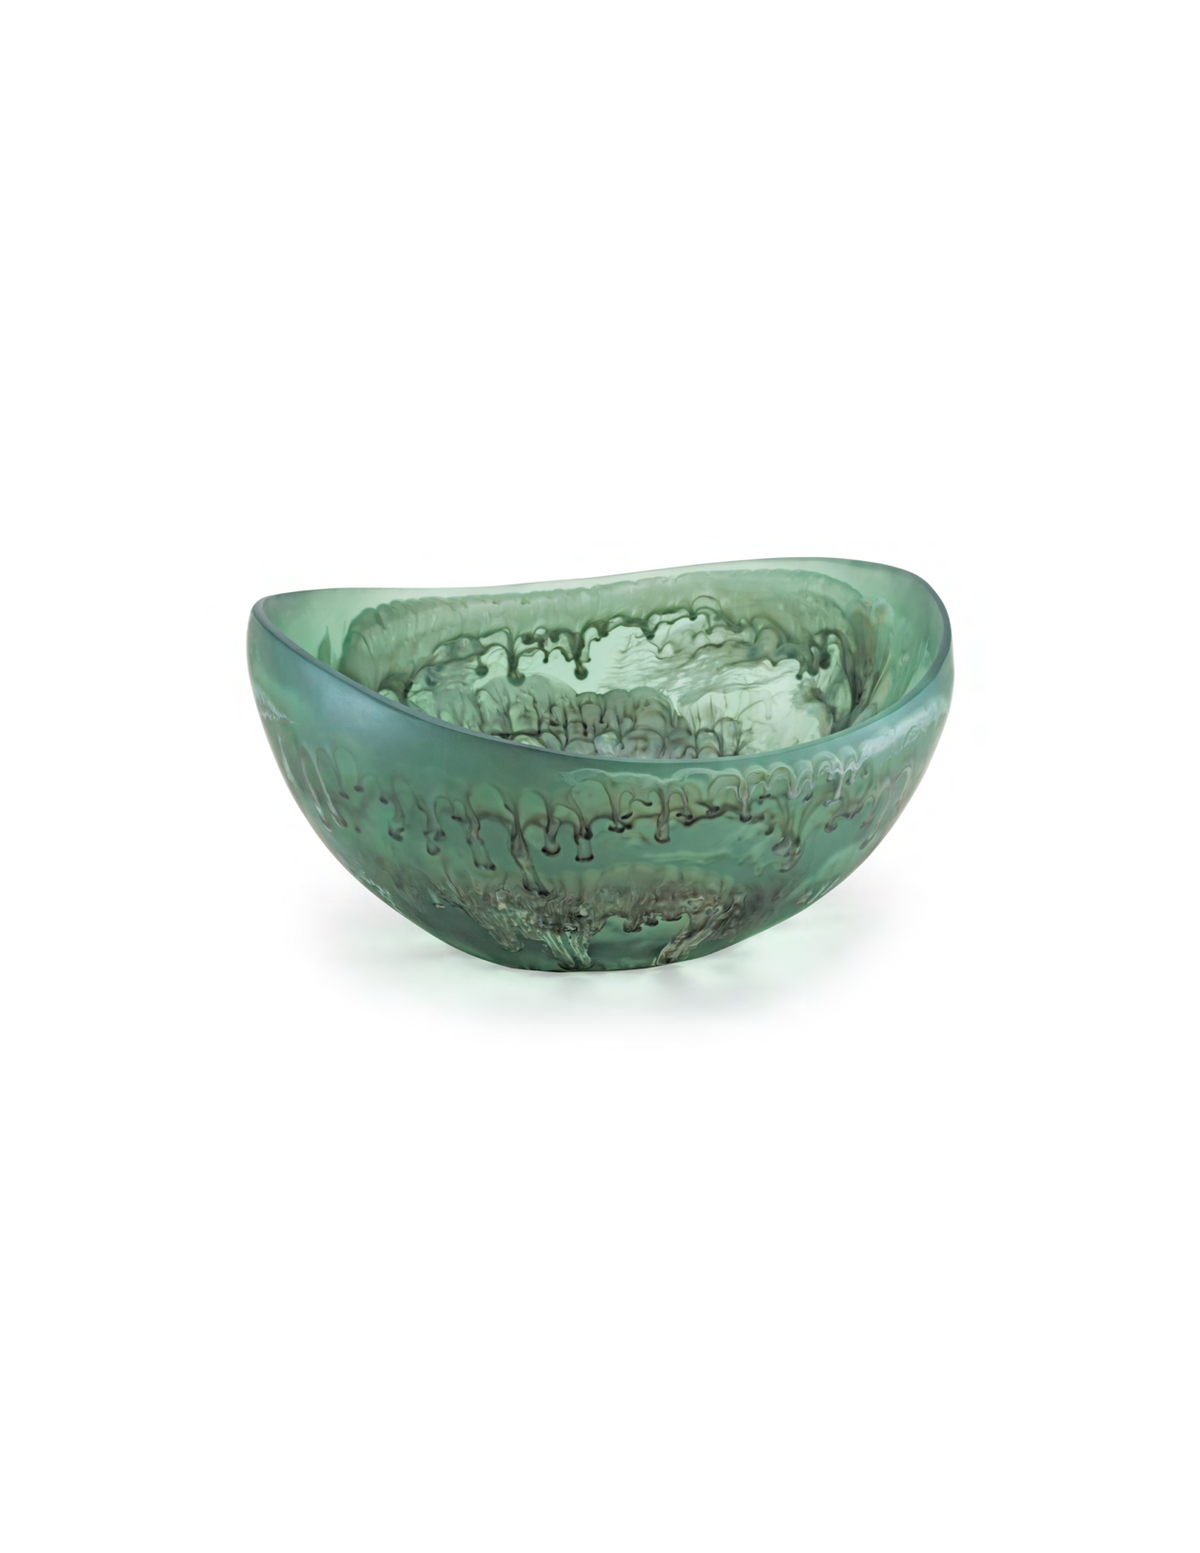 Almond Resin Bowl | Undisclosed